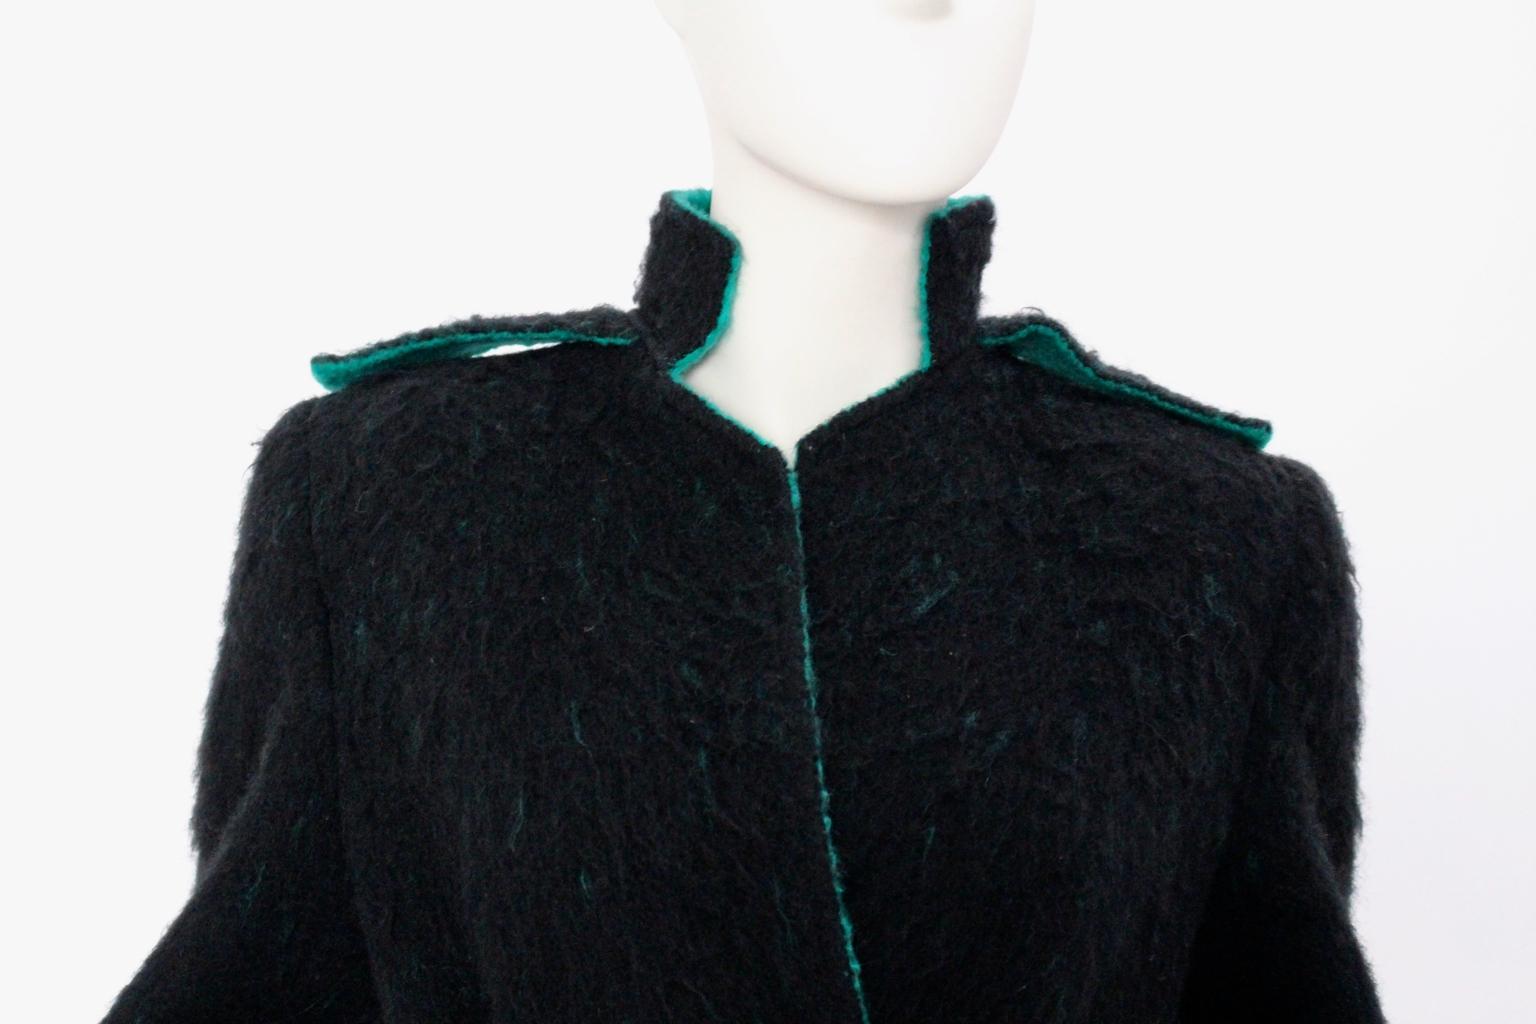 Lancetti Roma Vintage Black and Green Wool Coat 1970s For Sale 3